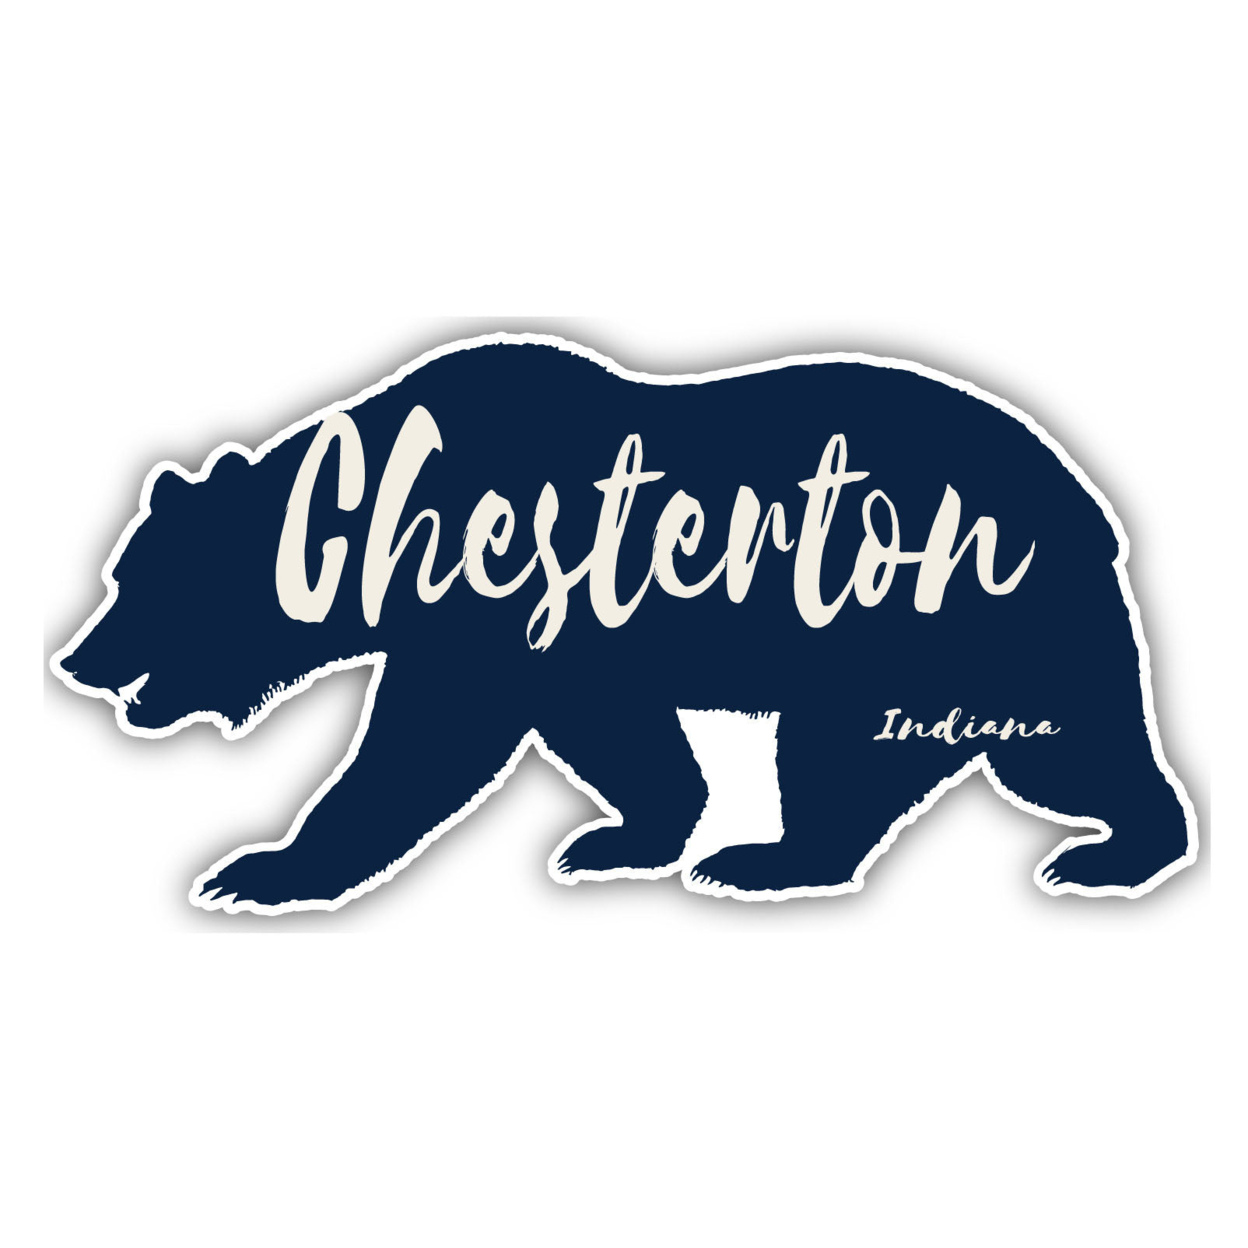 Chesterton Indiana Souvenir Decorative Stickers (Choose Theme And Size) - 4-Pack, 6-Inch, Adventures Awaits